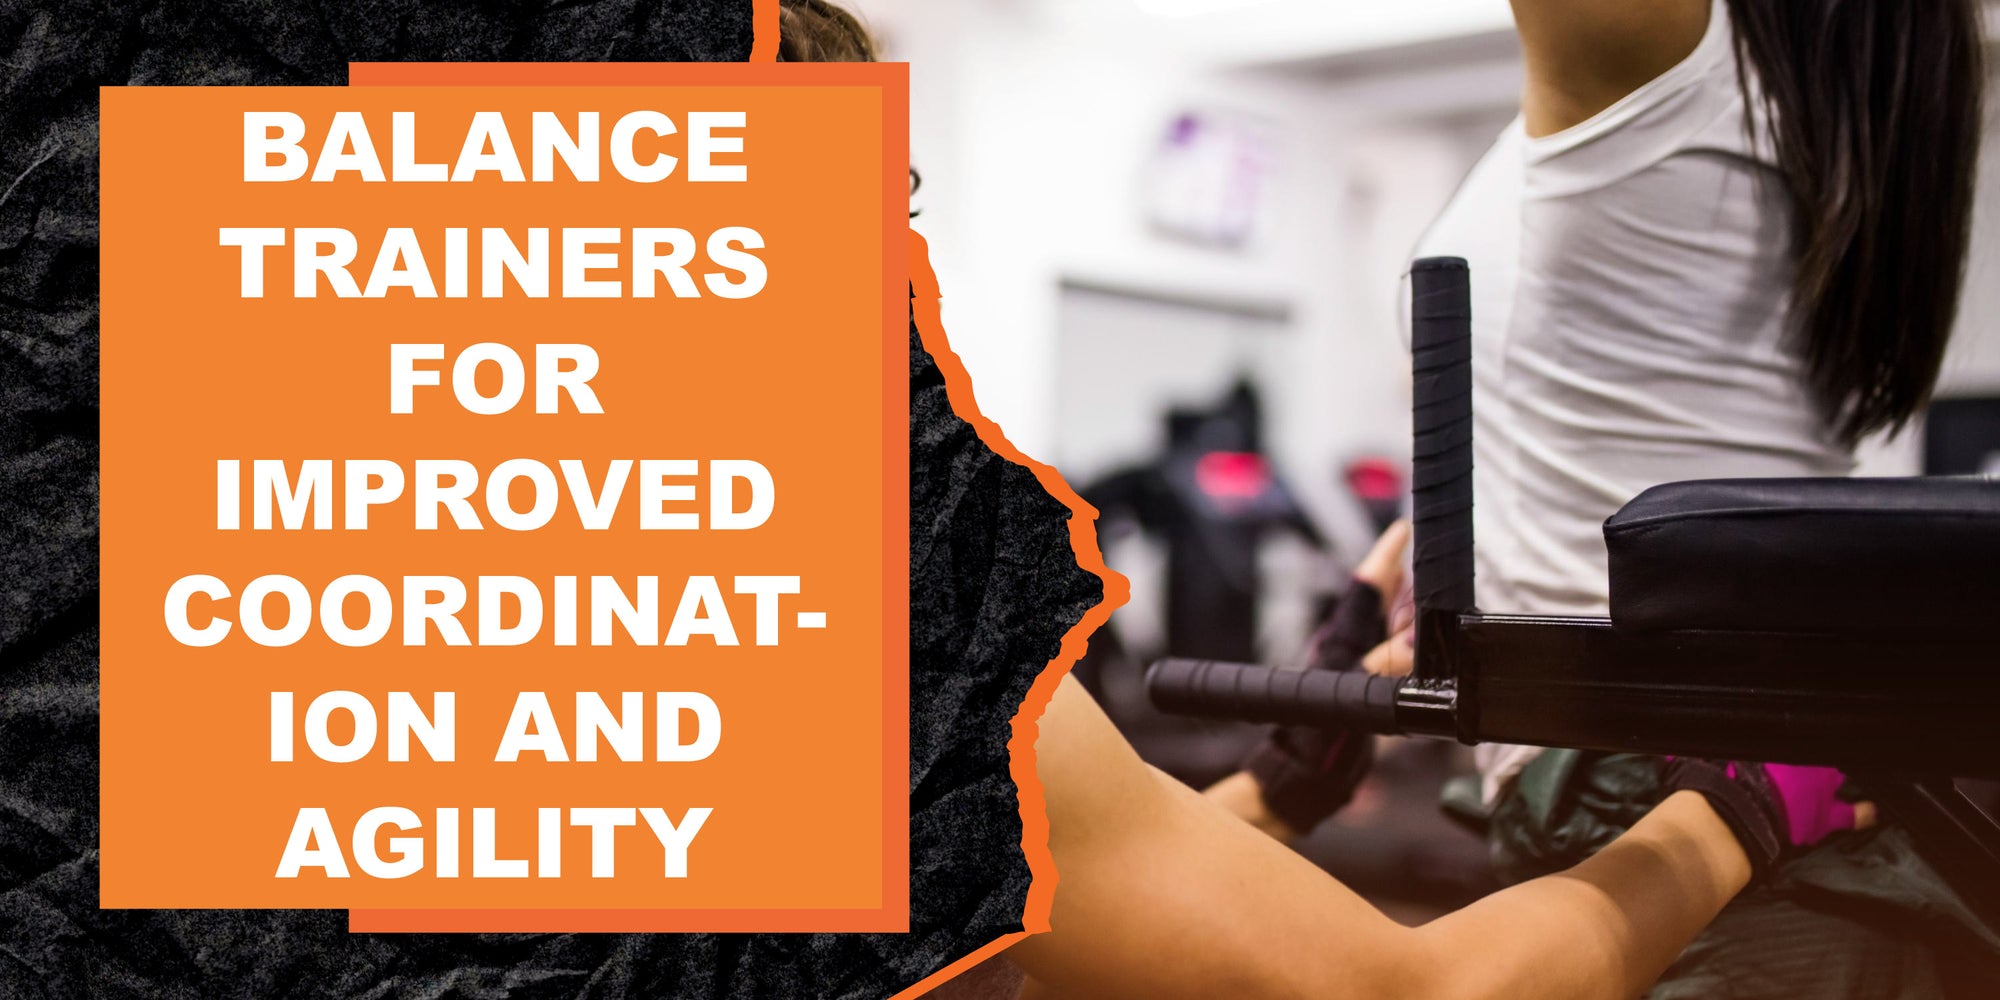 Balance Trainers for Improved Coordination and Agility